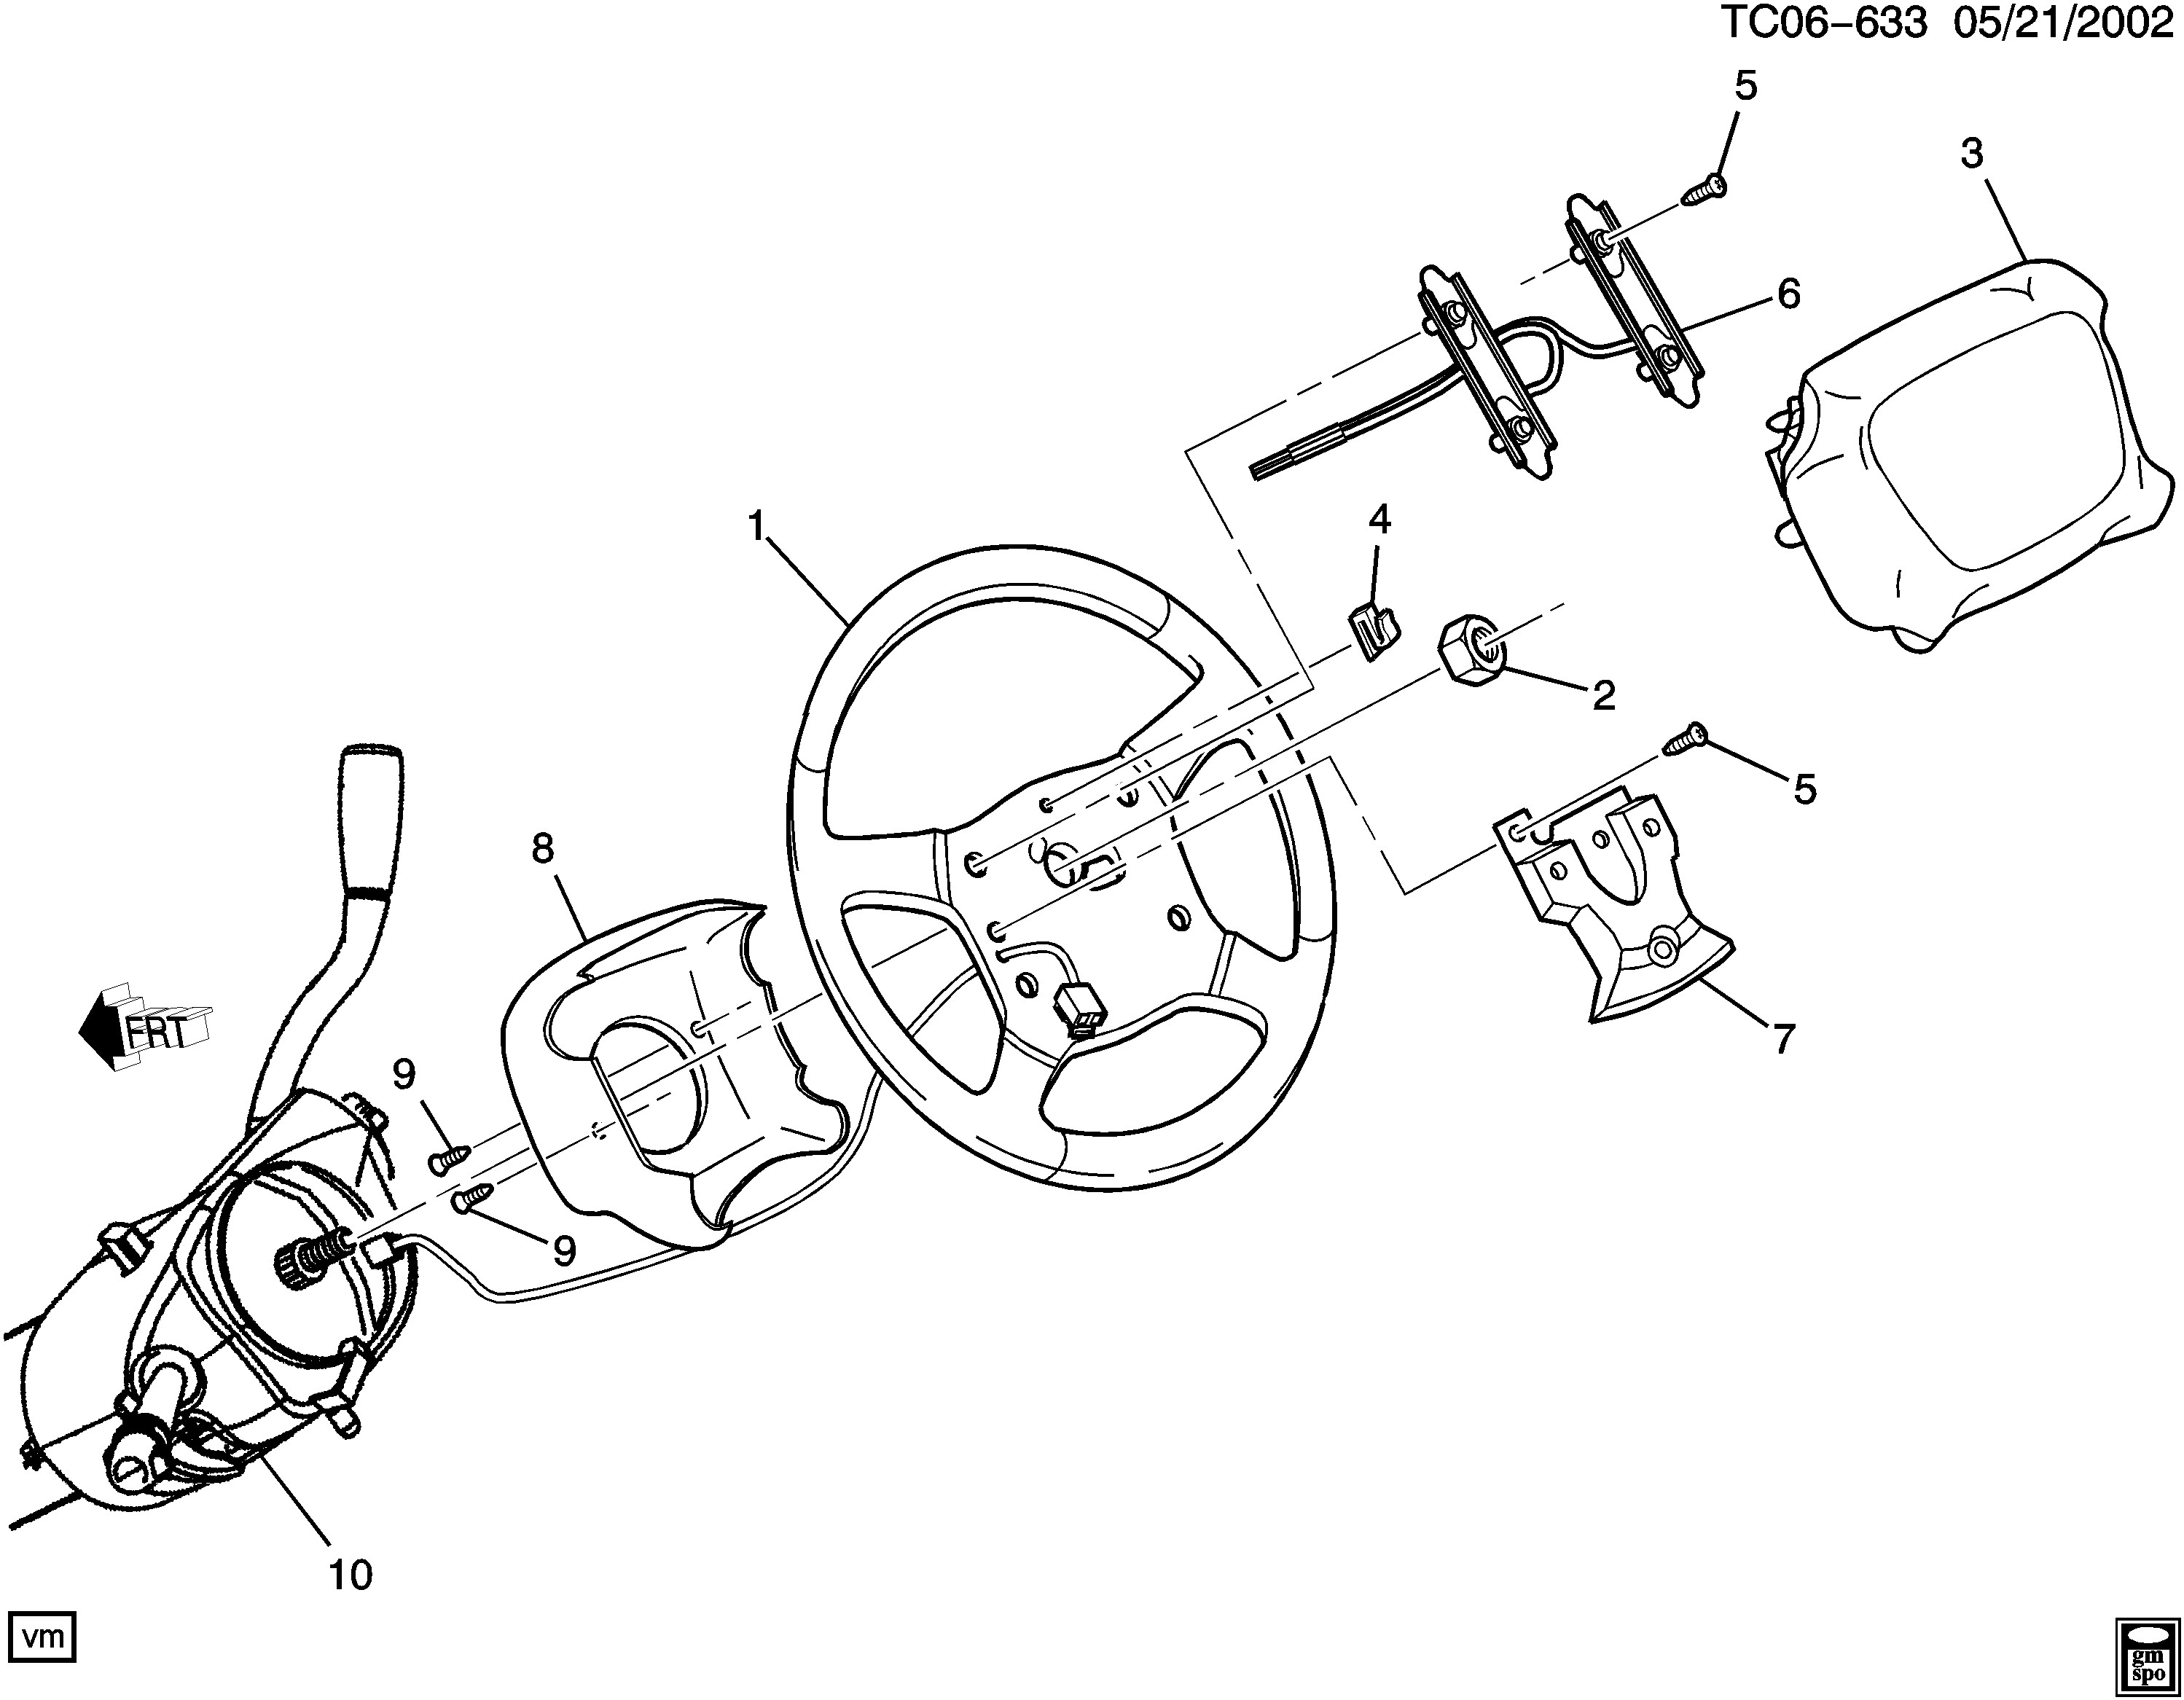 2002 Chevy Avalanche Parts Diagram Avalanche 1500 4wd Steering Wheel & Horn Parts Chevrolet Epc Of 2002 Chevy Avalanche Parts Diagram